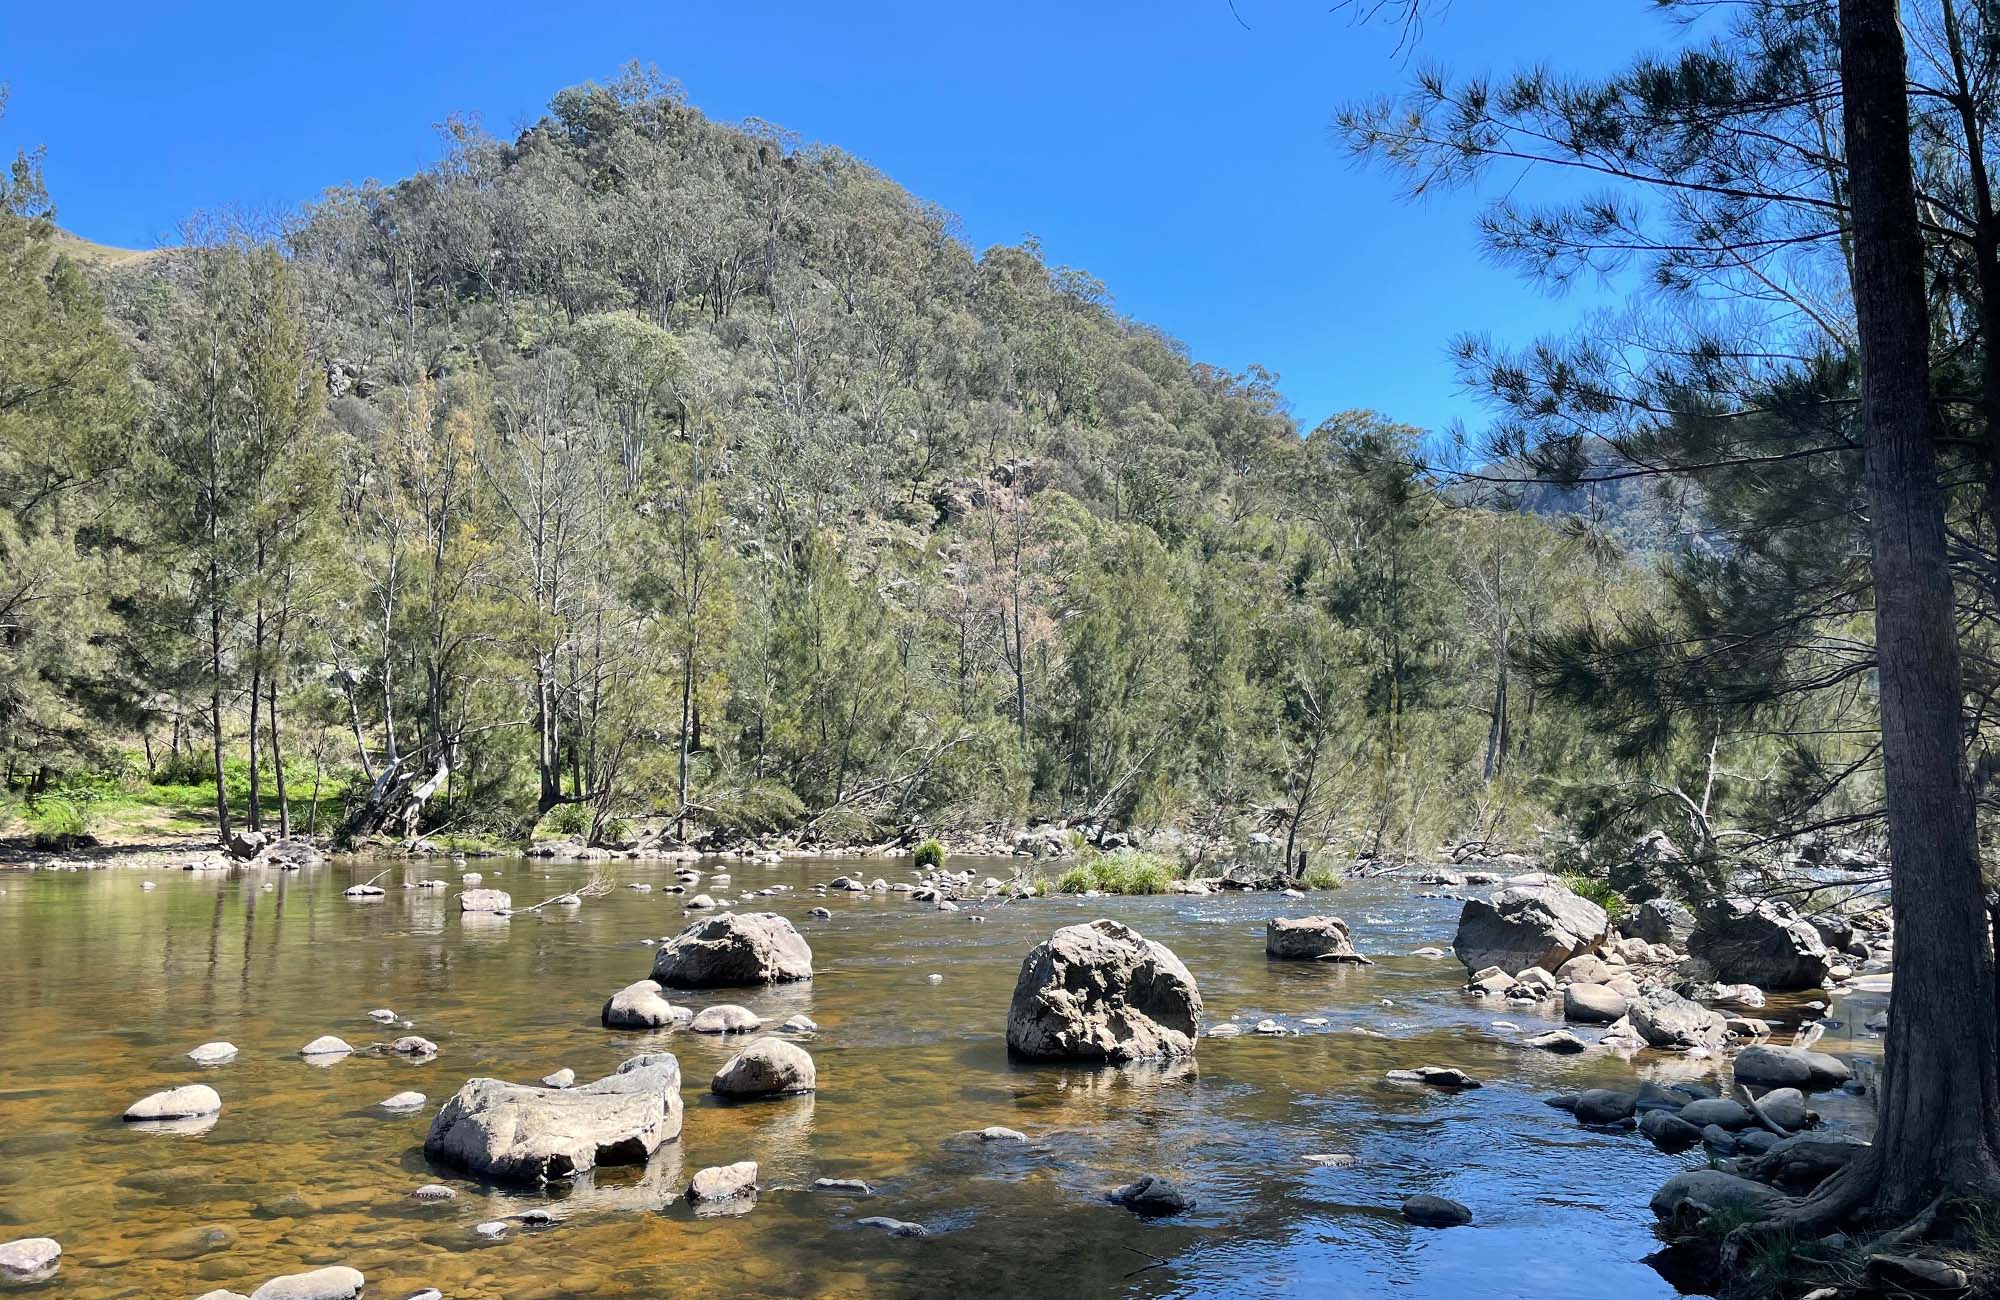 Wollondilly River in Little Forest West Area of Guula Ngurra National Park. Photo credit: Andrew Boleyn &copy; DPIE